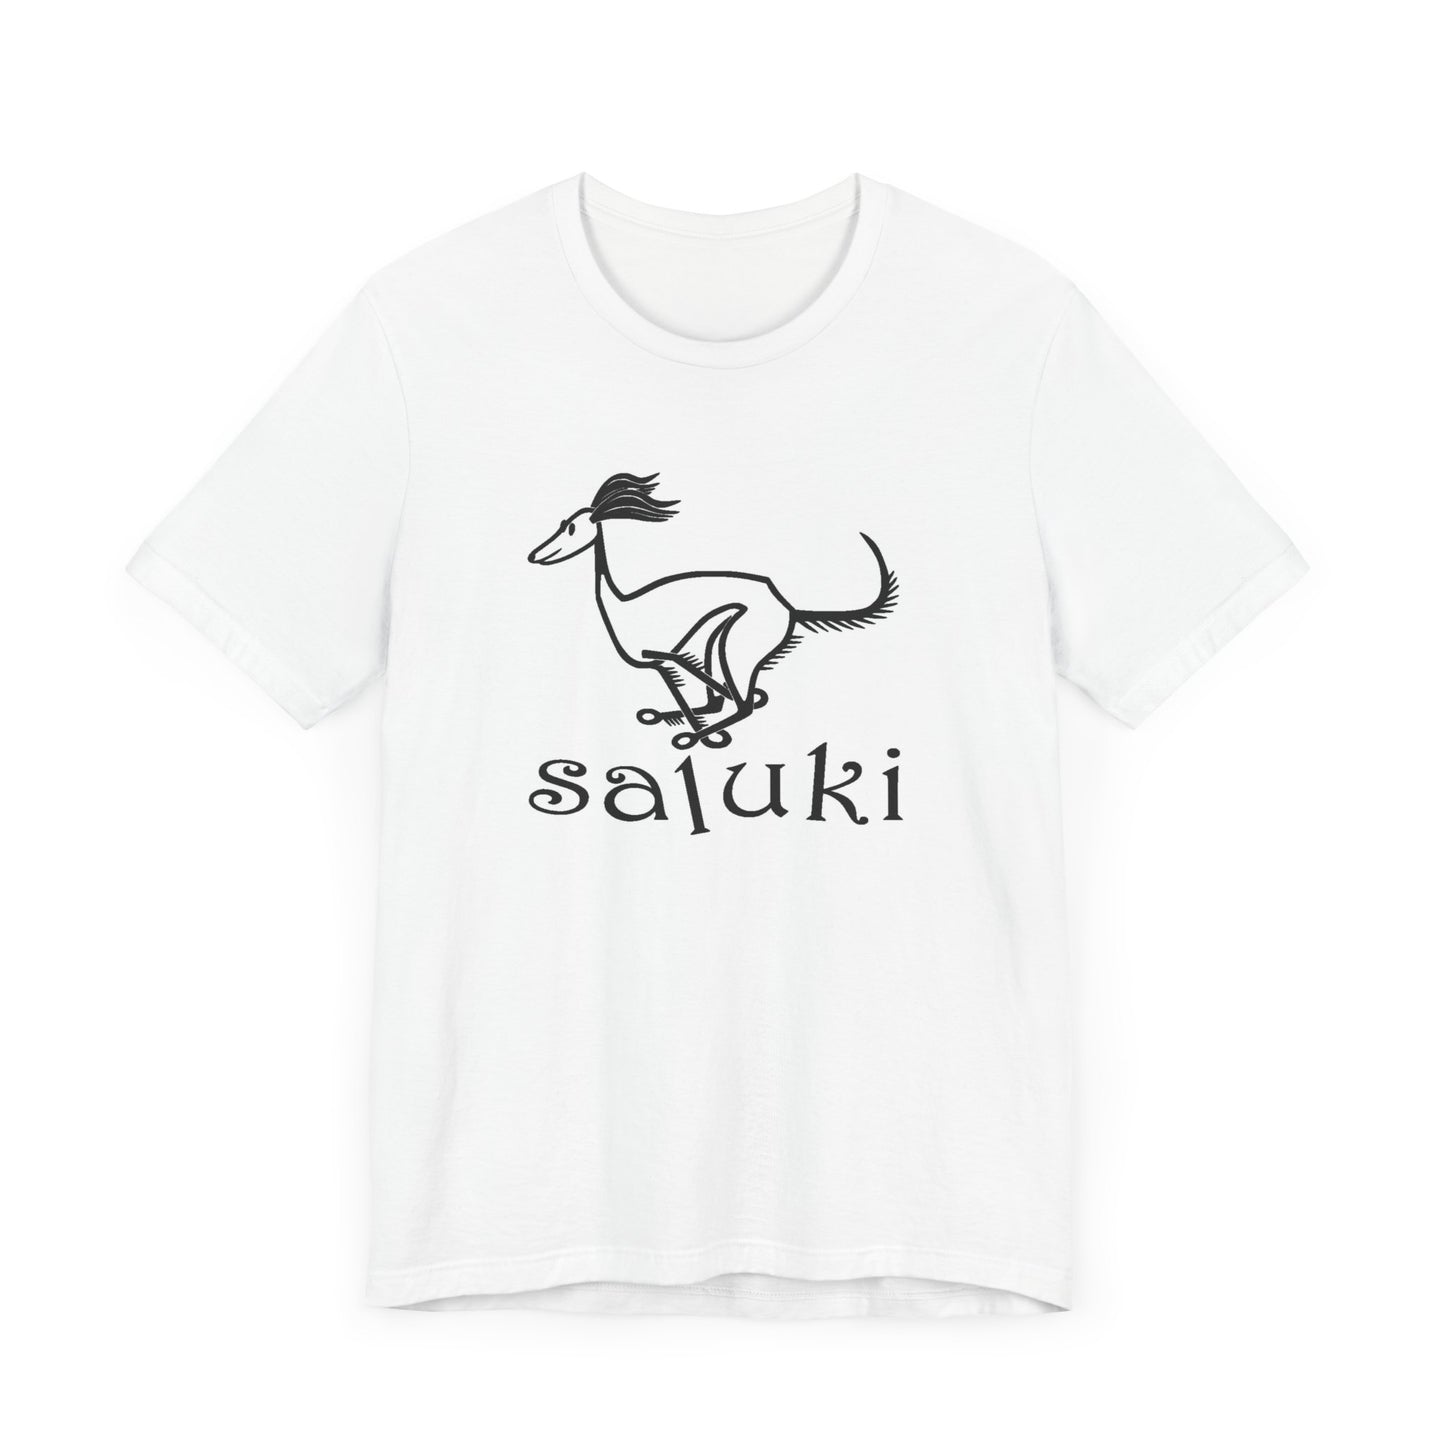 Unisex Jersey Short Sleeve Tee in white featuring a cartoon style Saluki dog galloping.